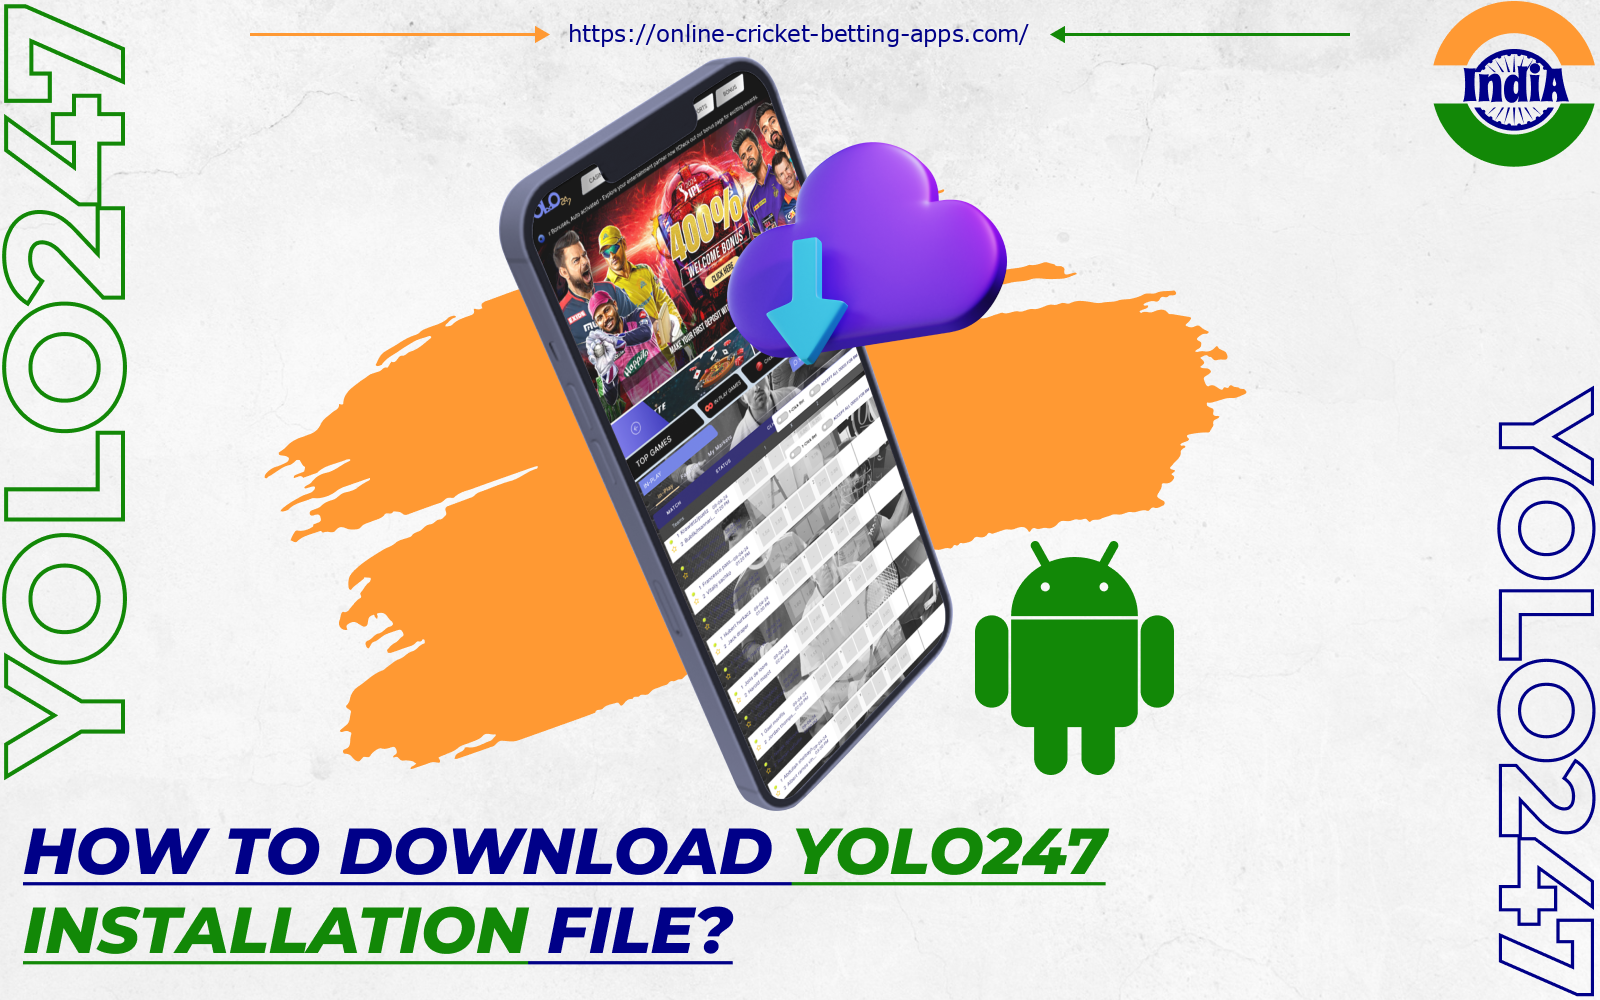 To install the mobile app on Android, an Indian user needs to make Yolo247 apk download